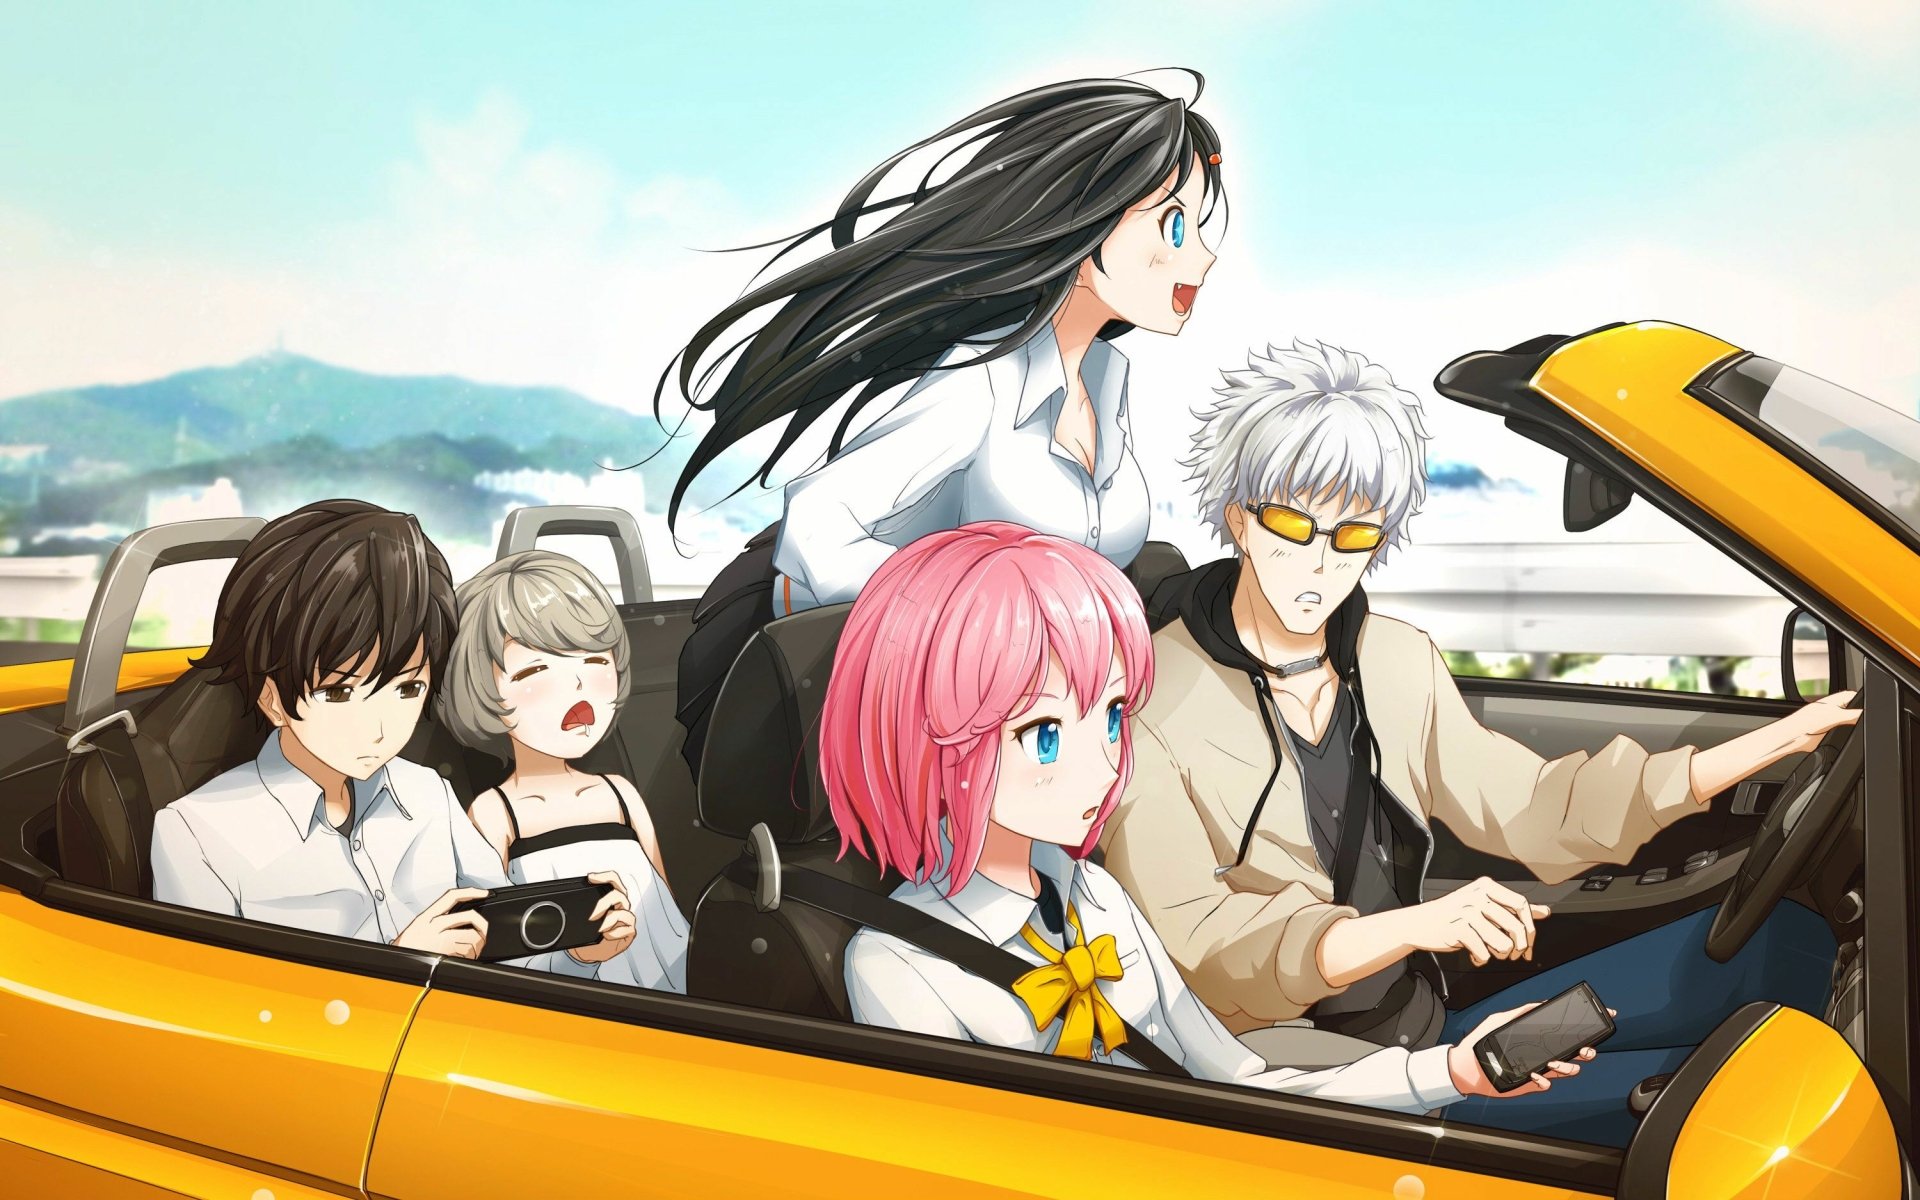 Closers HD Wallpaper | Background Image | 3000x1875 | ID ...